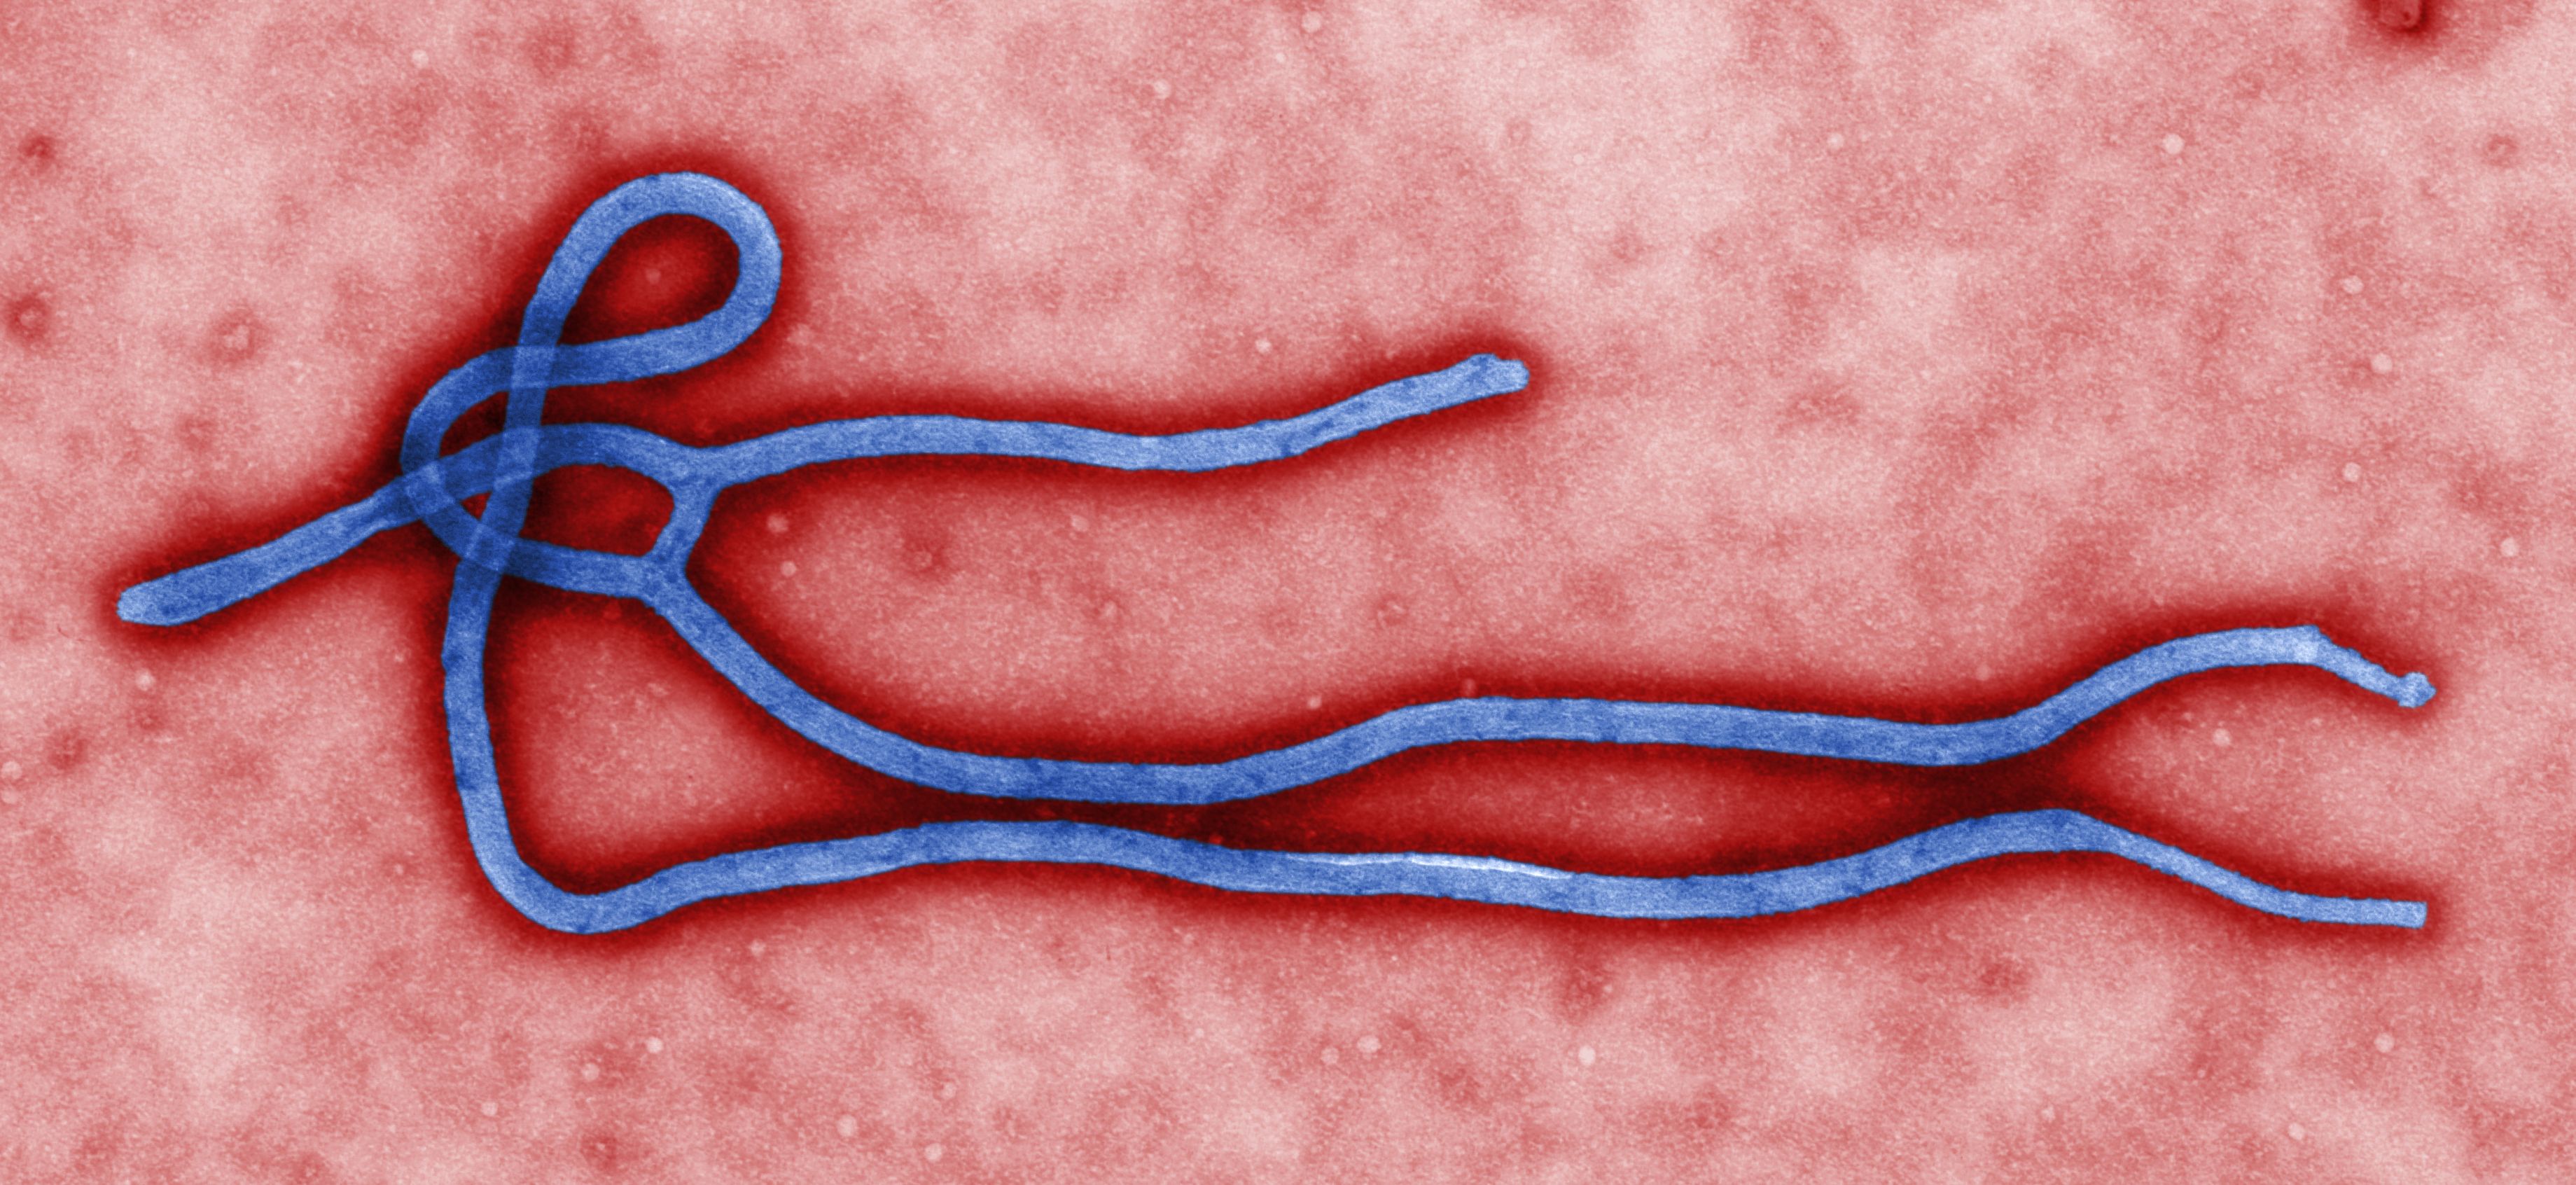 Ebola: Updates on the Outbreak